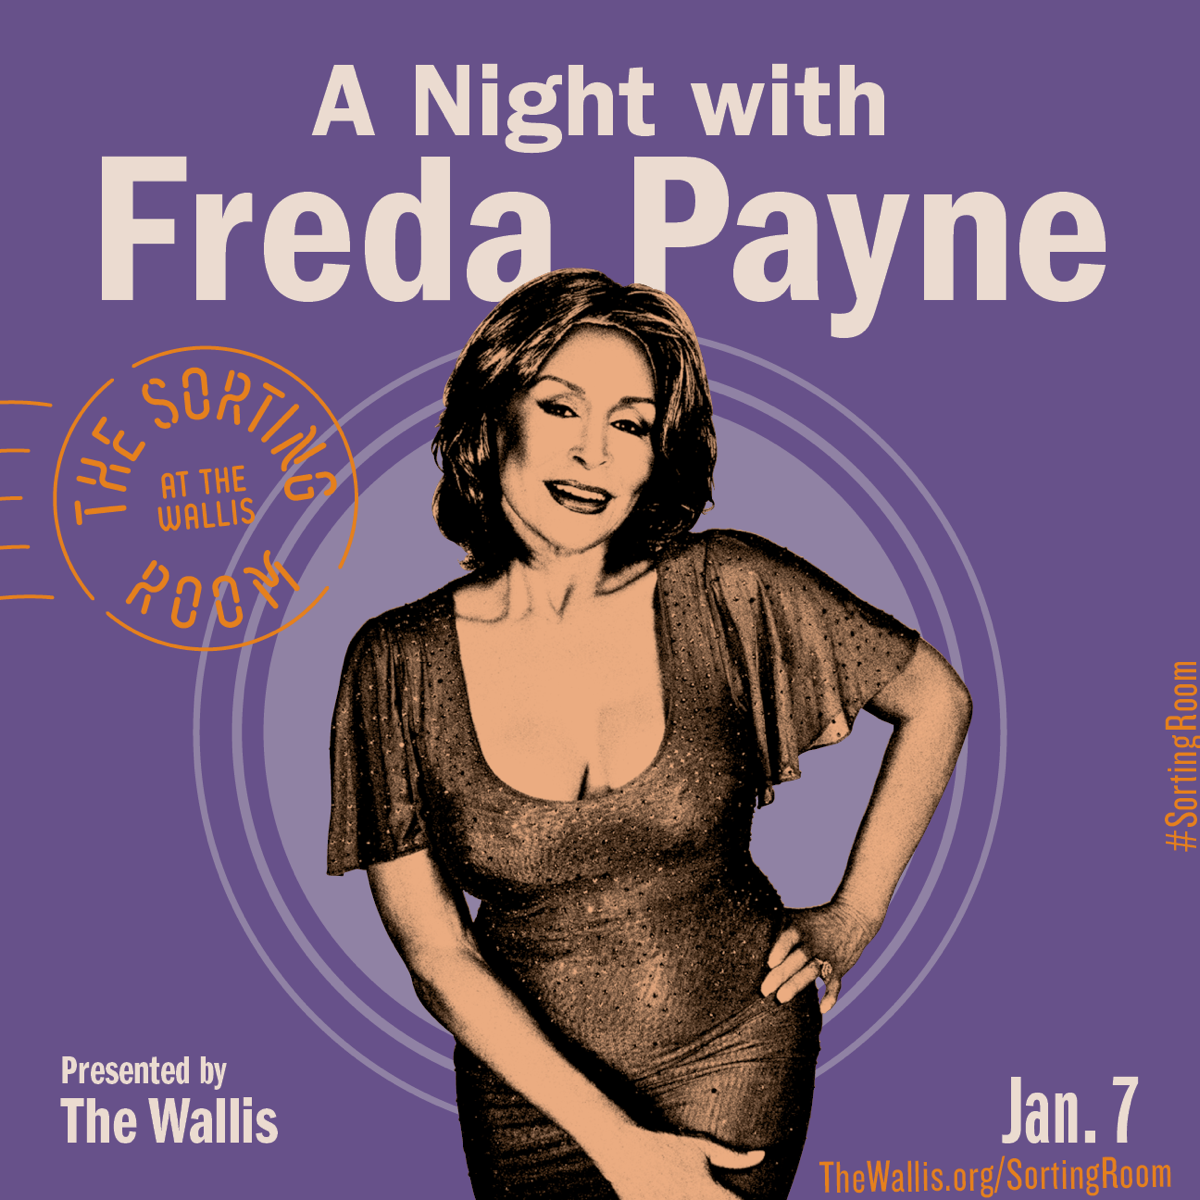 An Evening with Freda Payne. The Sorting Room at The Wallis.